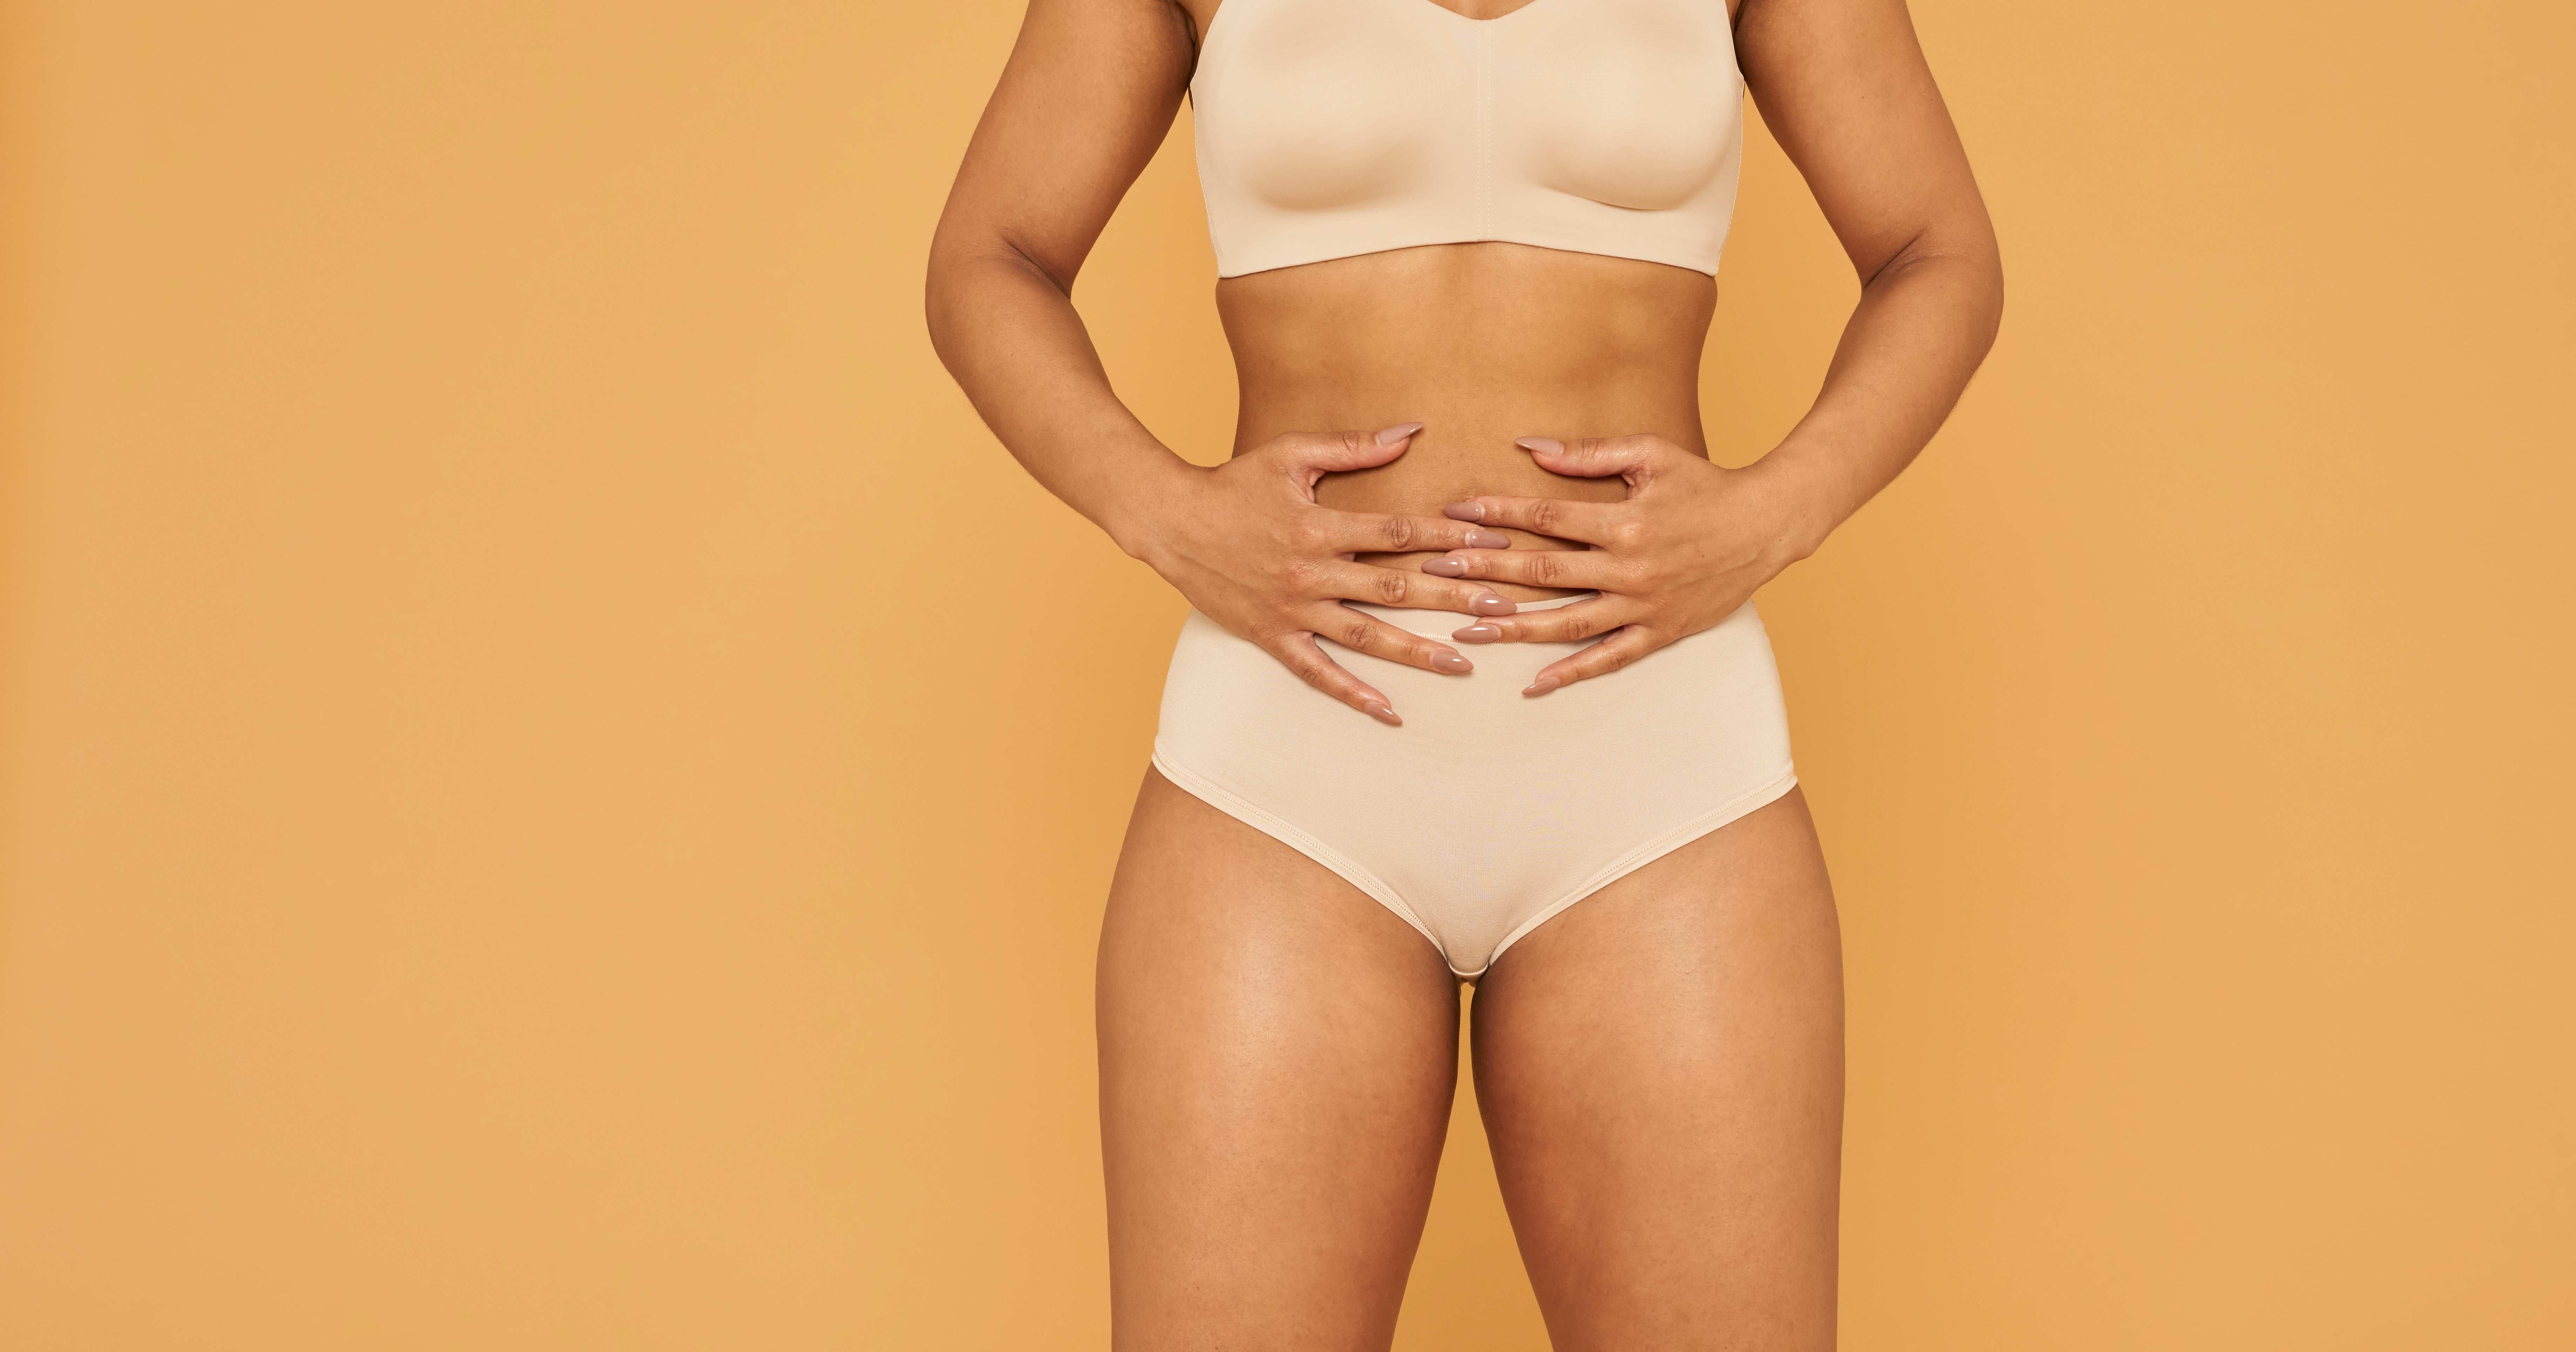 Can You Work Out in Period Underwear?